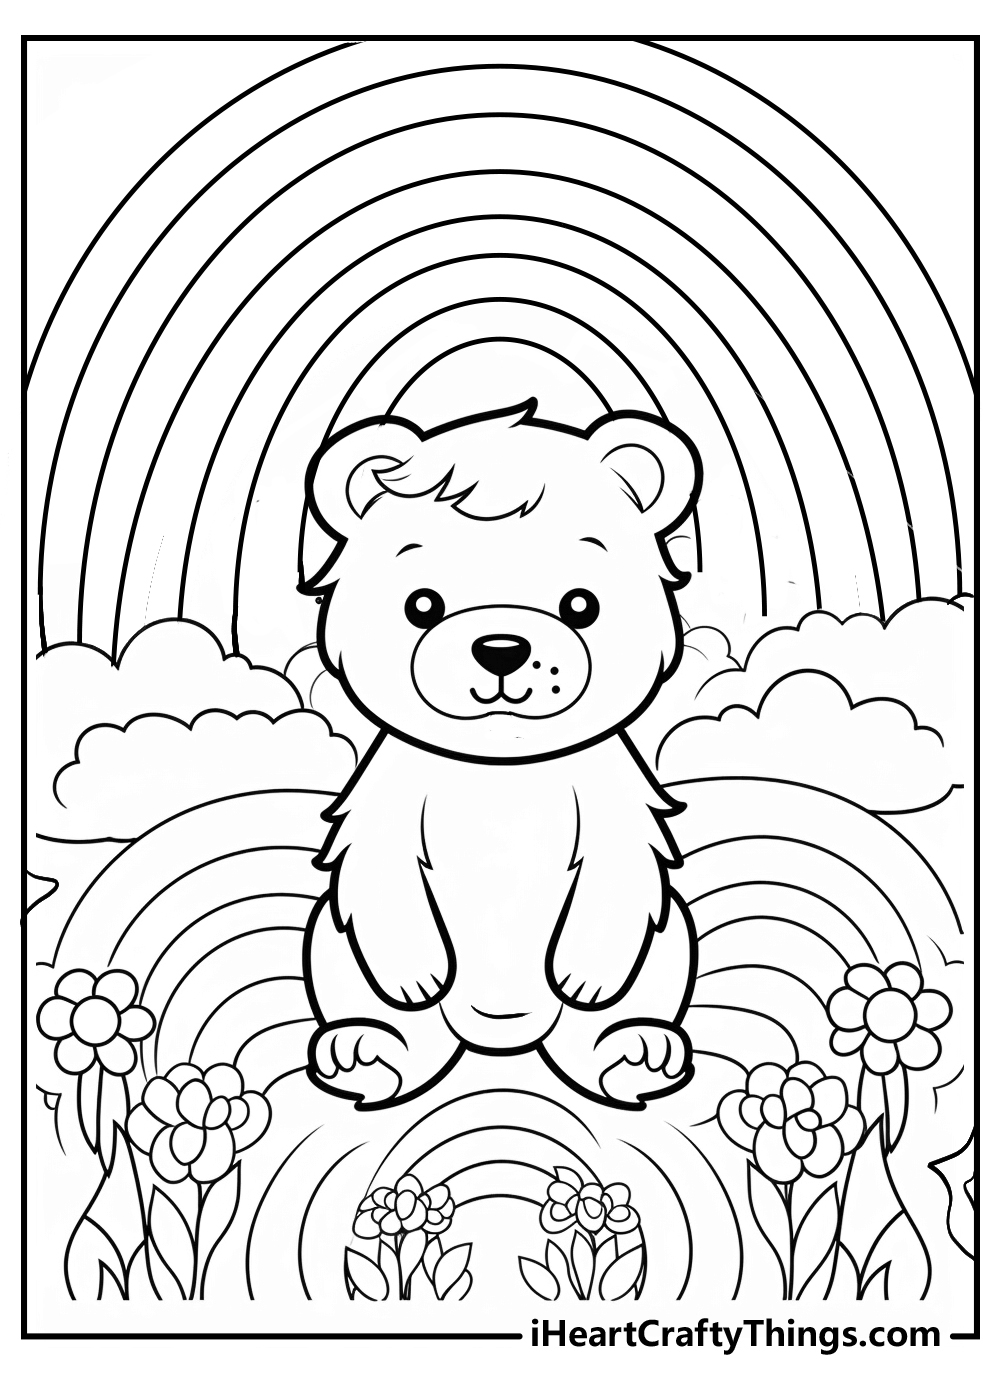 rainbow teddy bear coloring pages